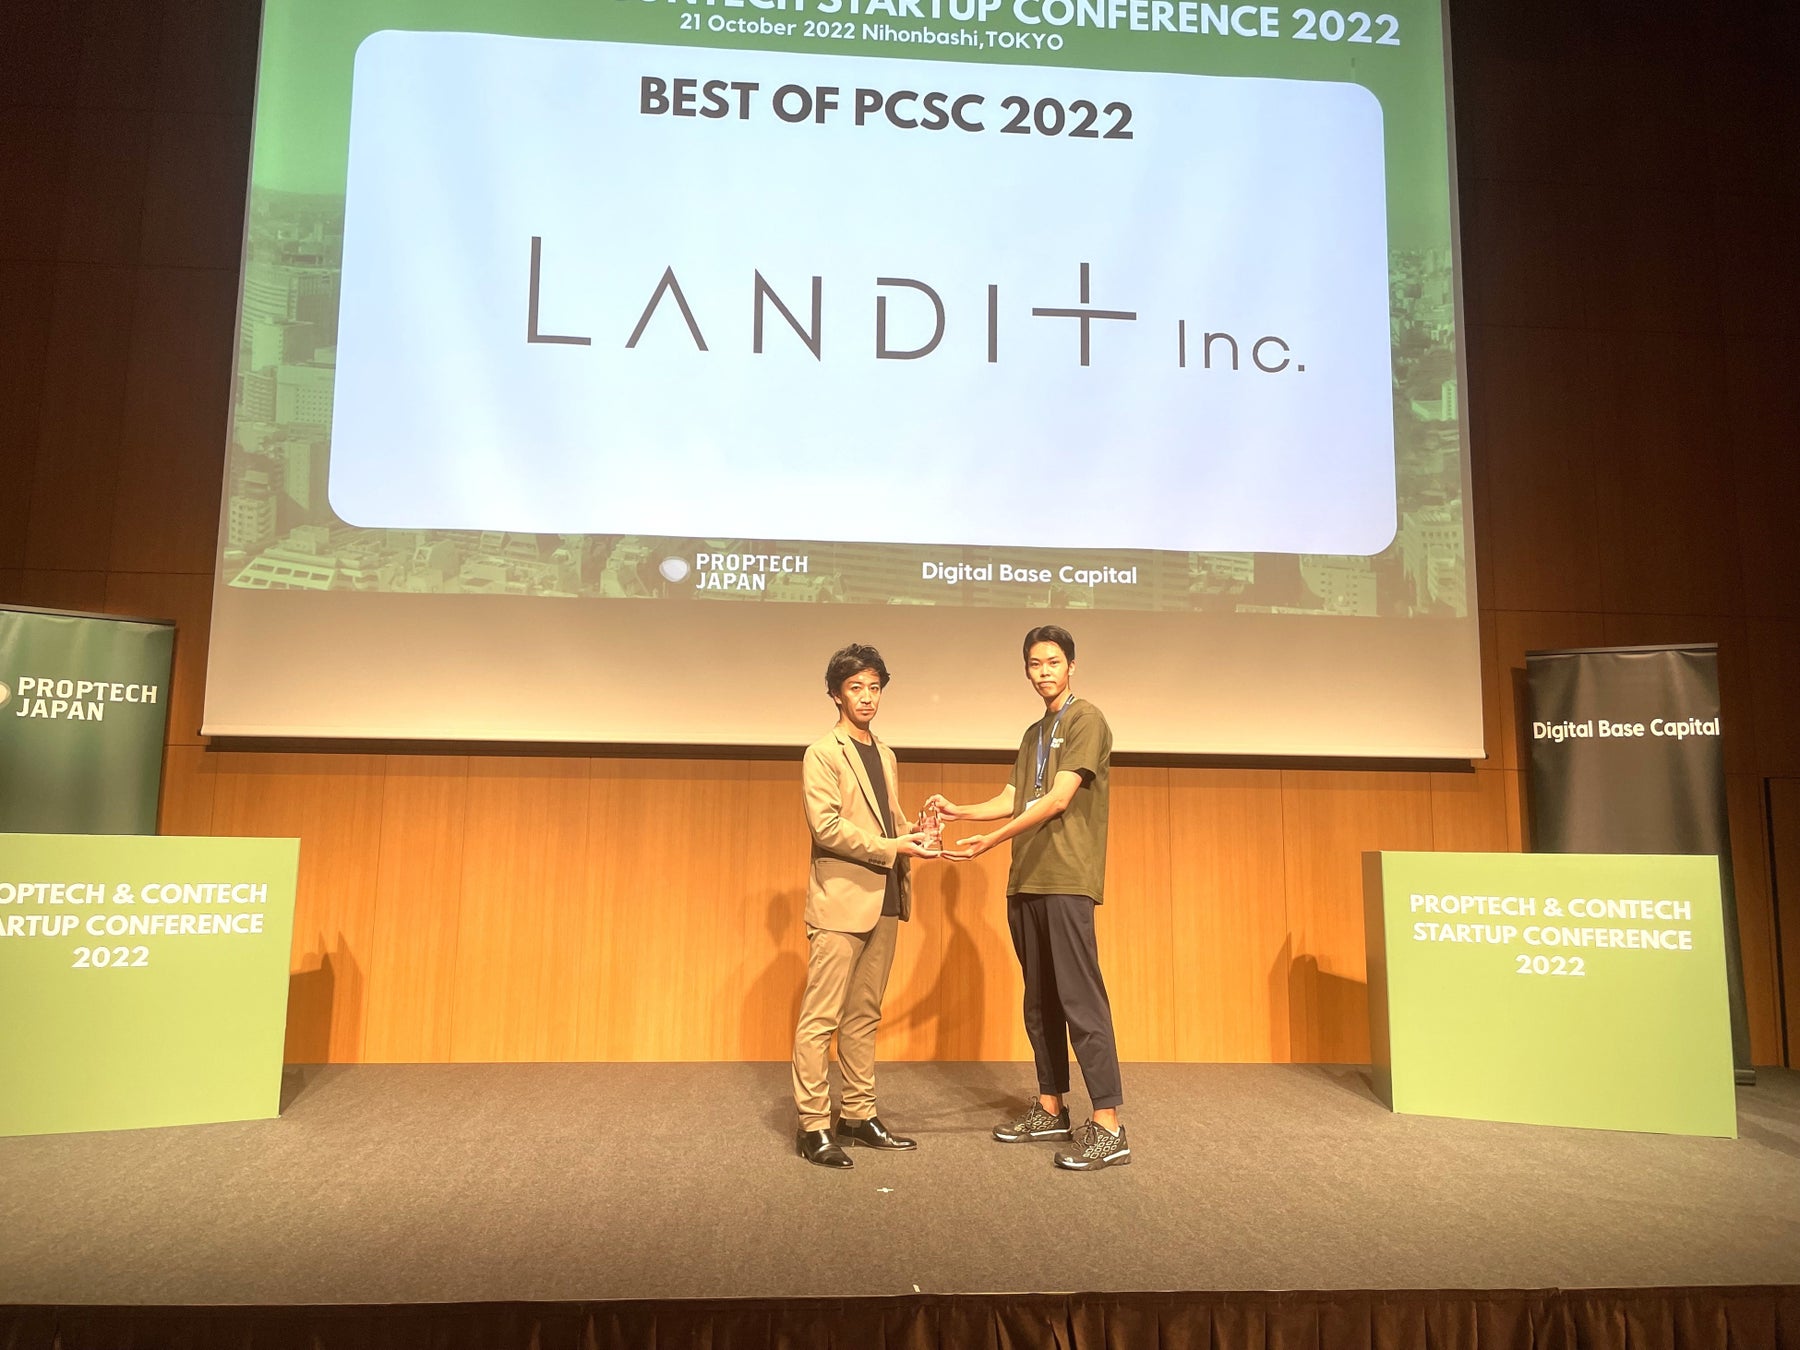 Landit、不動産＆建設DXイベント『PropTech & ConTech Startup Conference 2022』にて「Best of PCSC 2022」、「ANDPAD賞」を受賞のサブ画像4